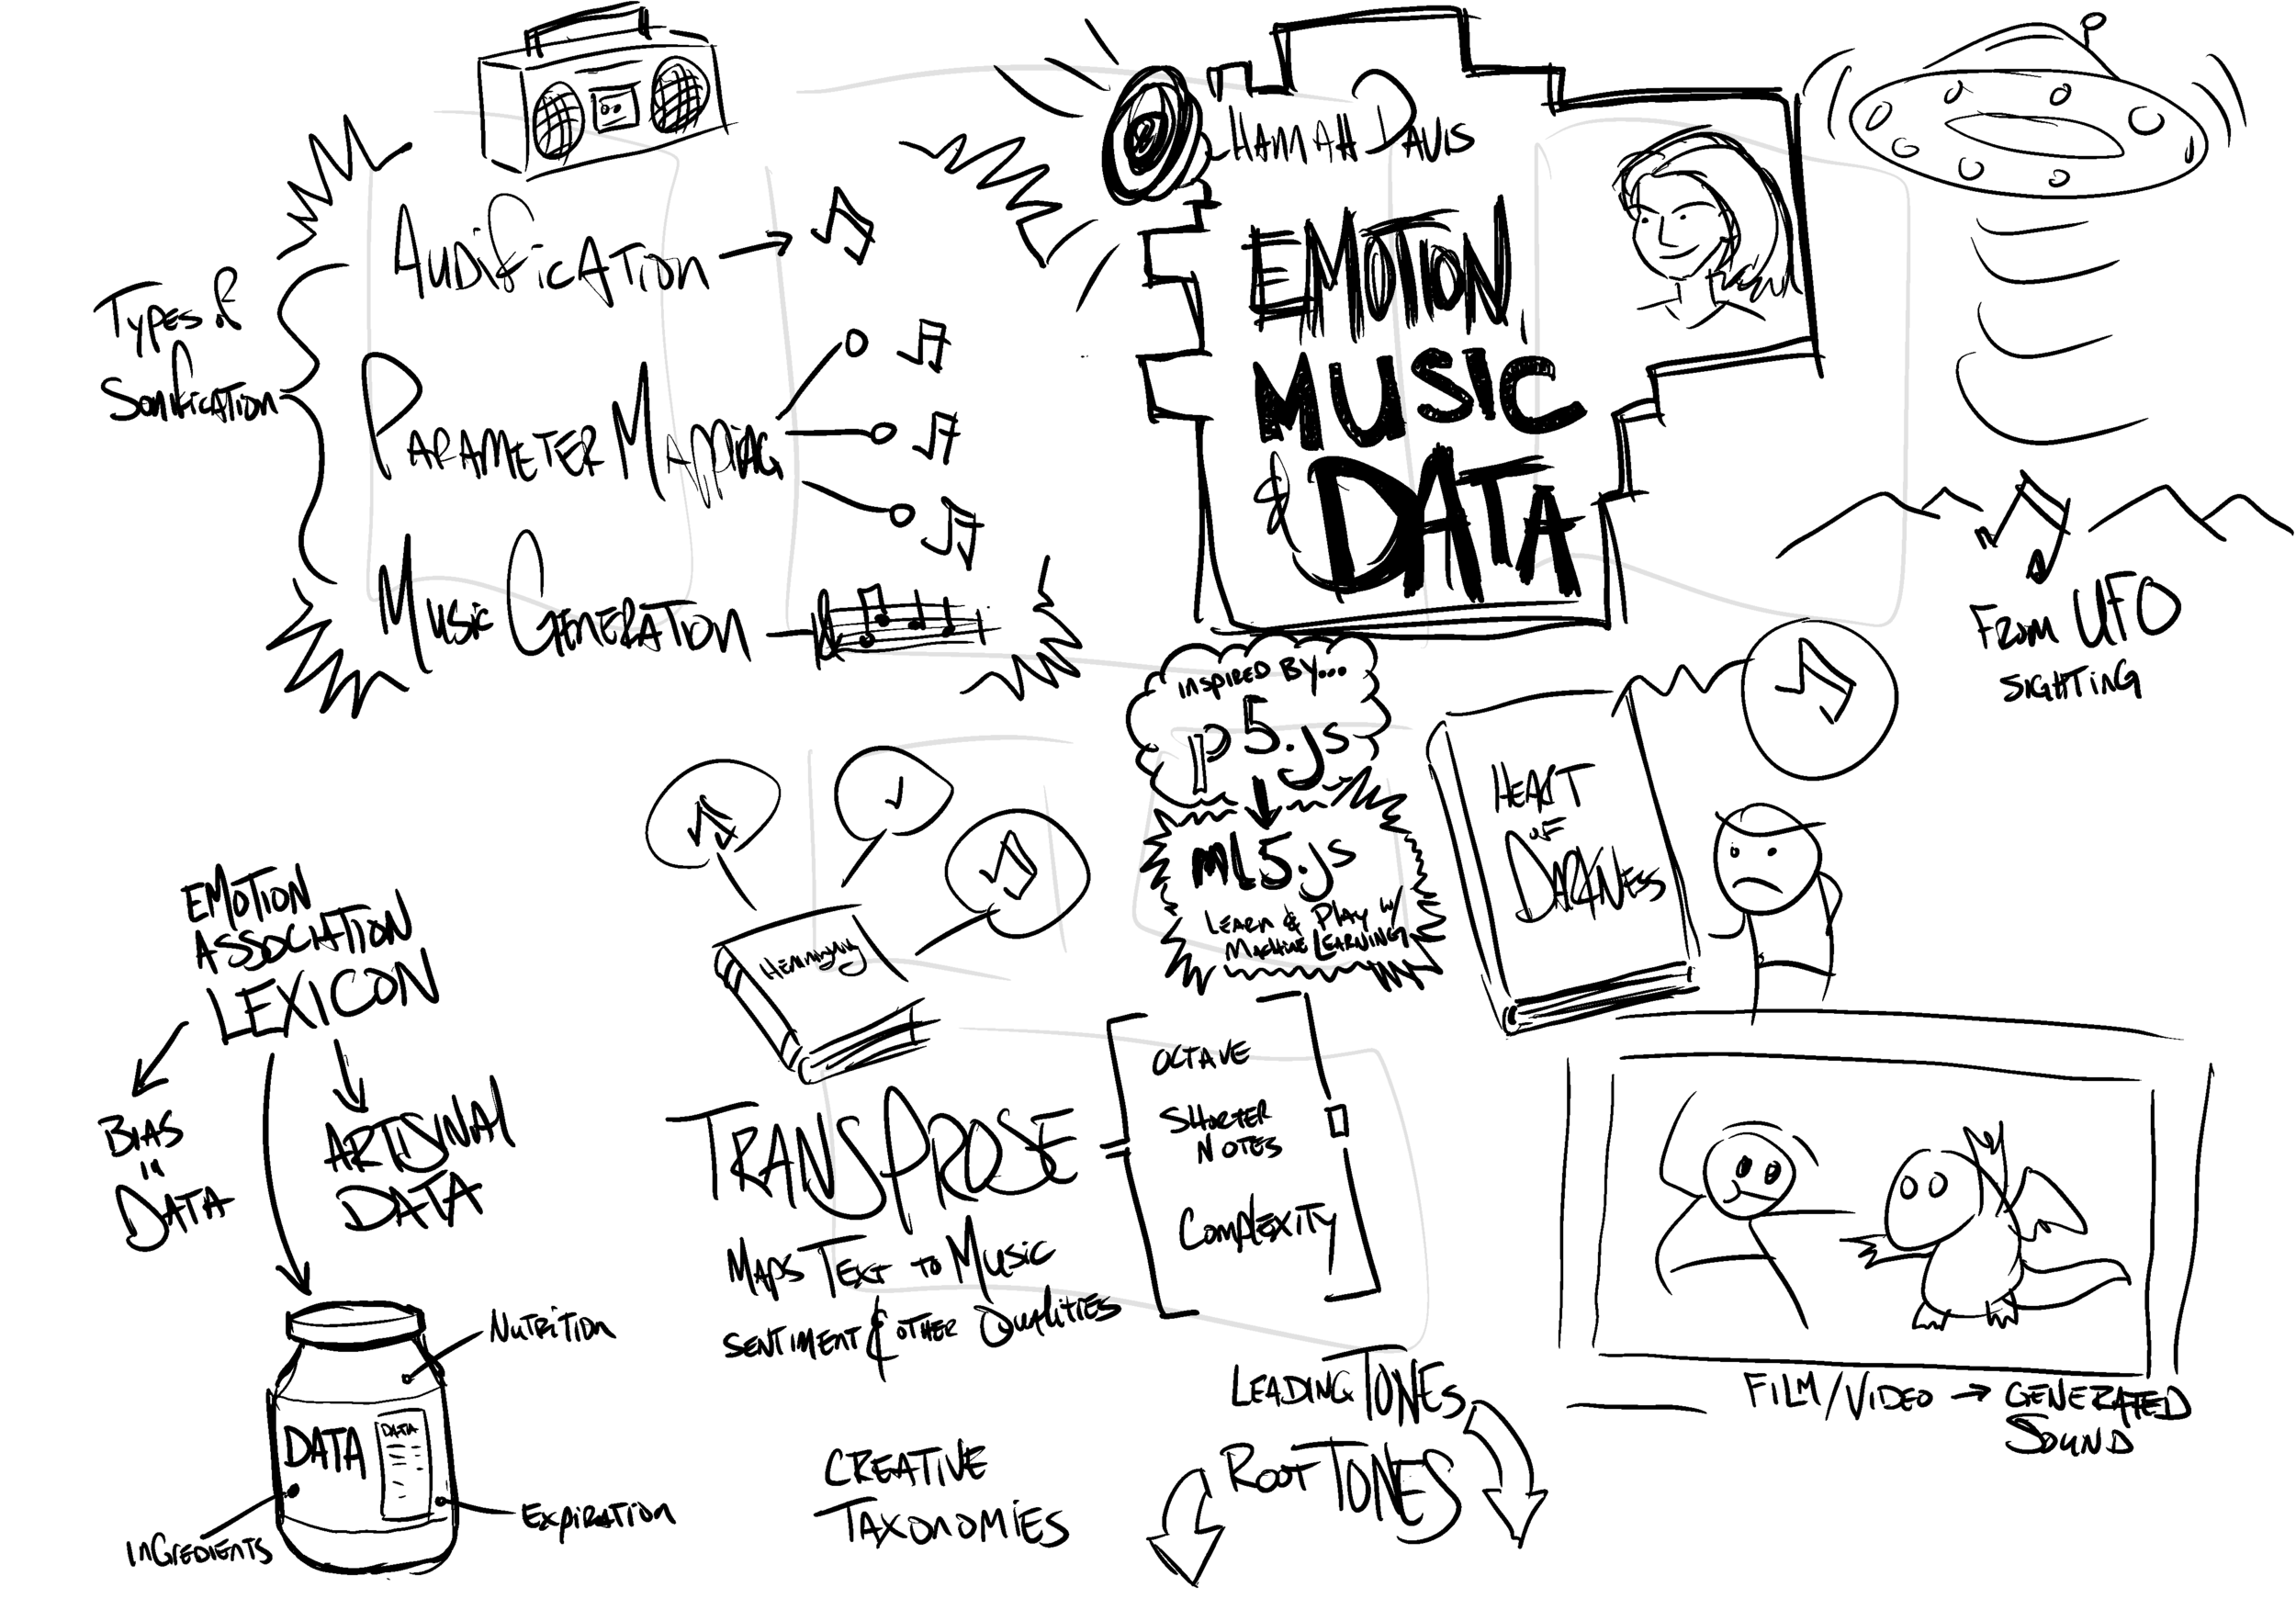 EYEO 2018 day 3 - Hannah Davis - Data, Music, and Emotion.png